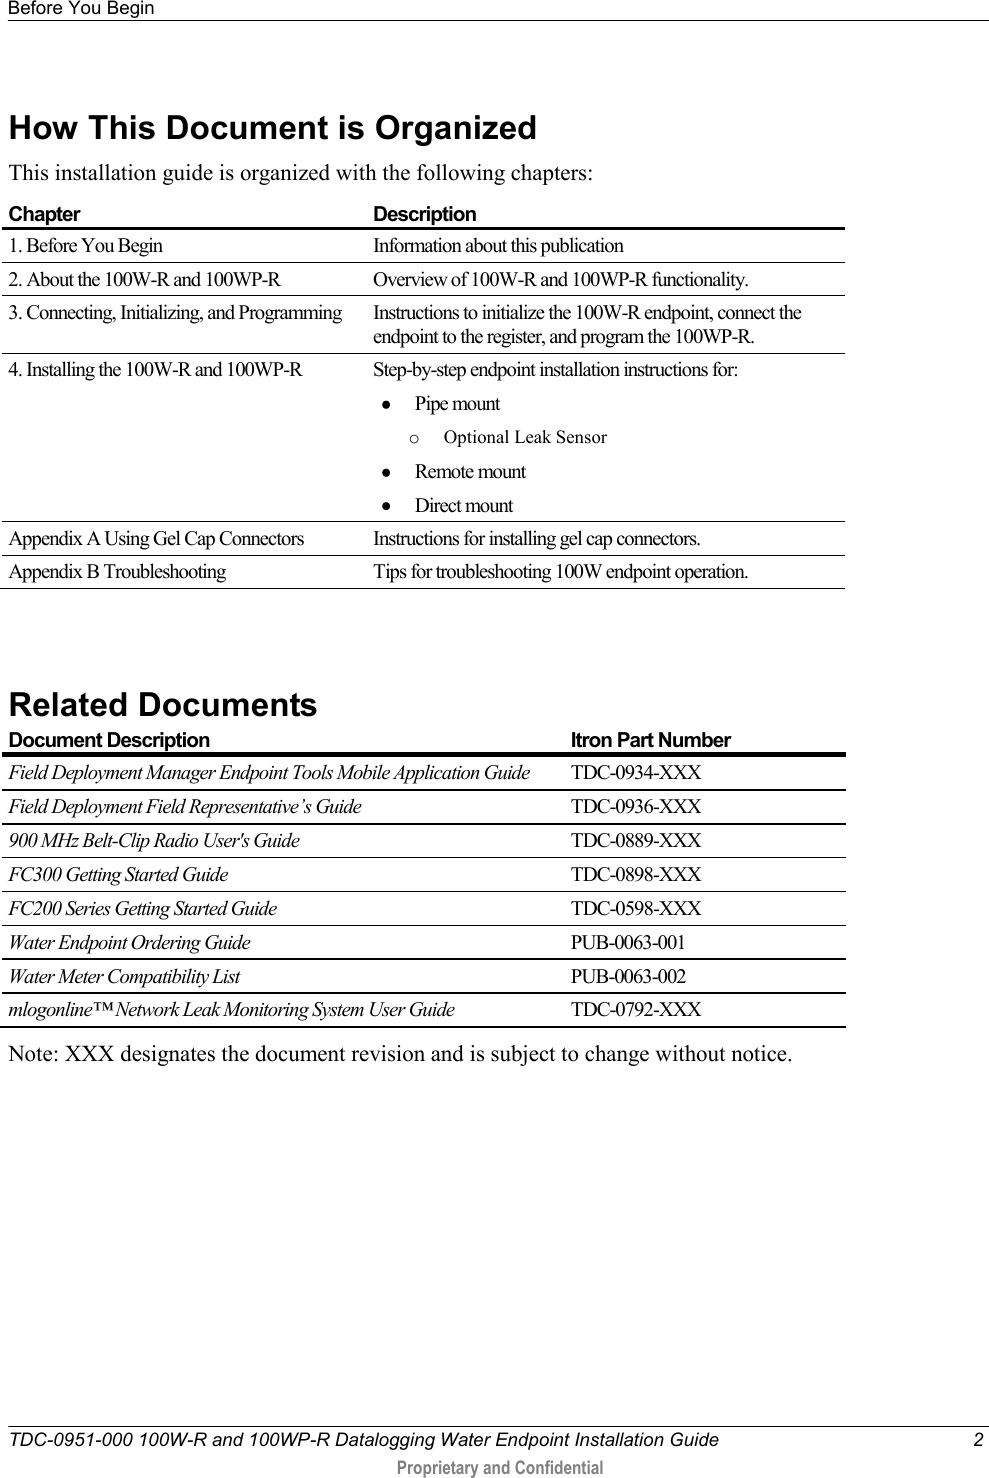 Before You Begin   TDC-0951-000 100W-R and 100WP-R Datalogging Water Endpoint Installation Guide  2  Proprietary and Confidential    How This Document is Organized This installation guide is organized with the following chapters: Chapter Description 1. Before You Begin Information about this publication 2. About the 100W-R and 100WP-R Overview of 100W-R and 100WP-R functionality.  3. Connecting, Initializing, and Programming Instructions to initialize the 100W-R endpoint, connect the endpoint to the register, and program the 100WP-R. 4. Installing the 100W-R and 100WP-R Step-by-step endpoint installation instructions for:  Pipe mount o Optional Leak Sensor  Remote mount  Direct mount Appendix A Using Gel Cap Connectors Instructions for installing gel cap connectors. Appendix B Troubleshooting Tips for troubleshooting 100W endpoint operation.   Related Documents Document Description Itron Part Number  Field Deployment Manager Endpoint Tools Mobile Application Guide TDC-0934-XXX Field Deployment Field Representative’s Guide TDC-0936-XXX 900 MHz Belt-Clip Radio User&apos;s Guide TDC-0889-XXX FC300 Getting Started Guide  TDC-0898-XXX FC200 Series Getting Started Guide TDC-0598-XXX Water Endpoint Ordering Guide PUB-0063-001 Water Meter Compatibility List PUB-0063-002 mlogonline™ Network Leak Monitoring System User Guide TDC-0792-XXX Note: XXX designates the document revision and is subject to change without notice.  